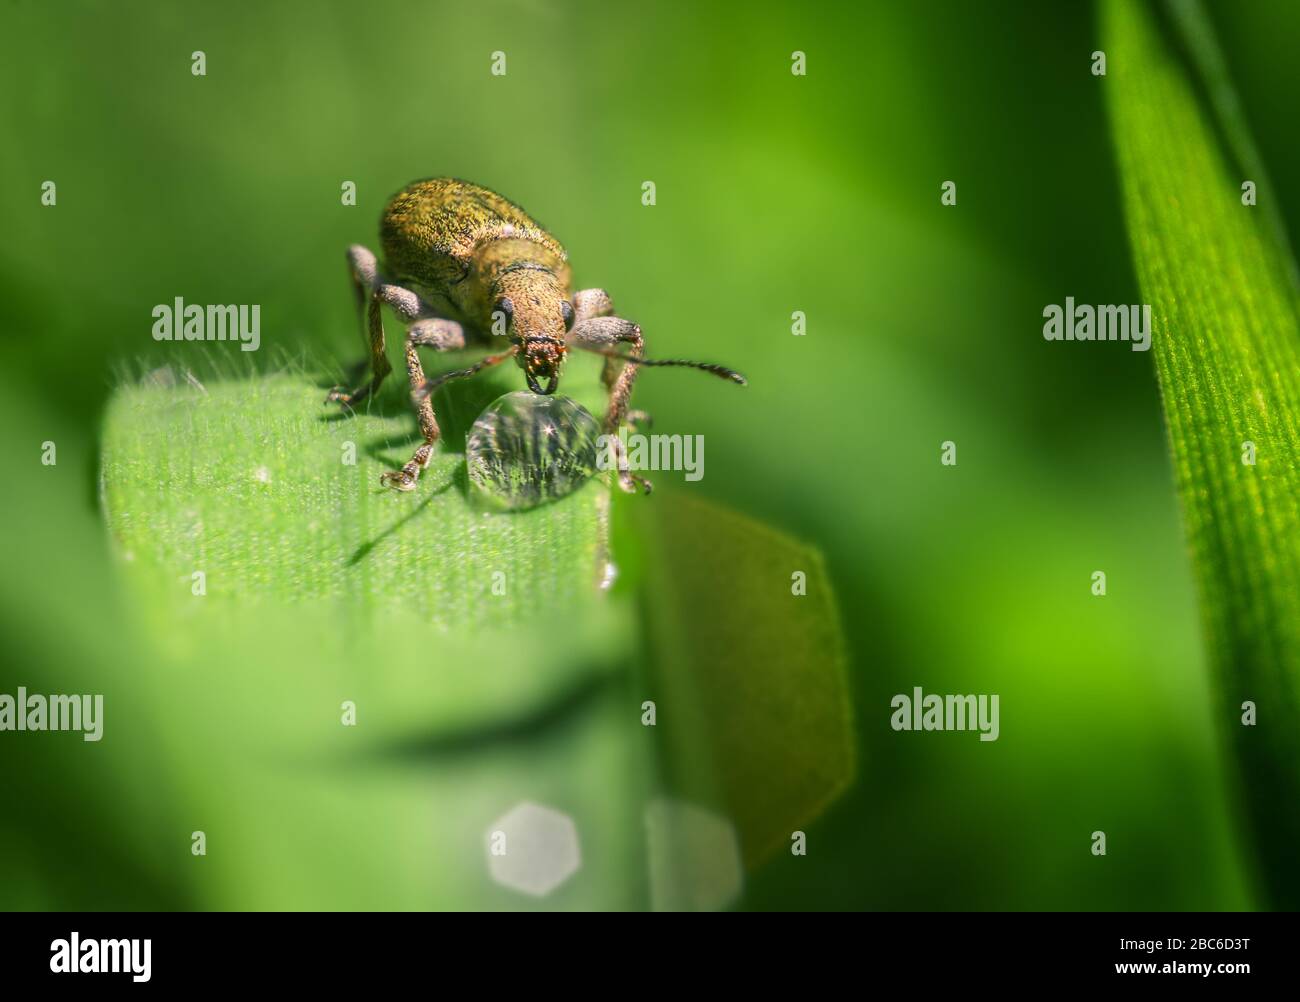 A beetle drinking from a drop of freshly fallen rain water on a blade of green grass Stock Photo